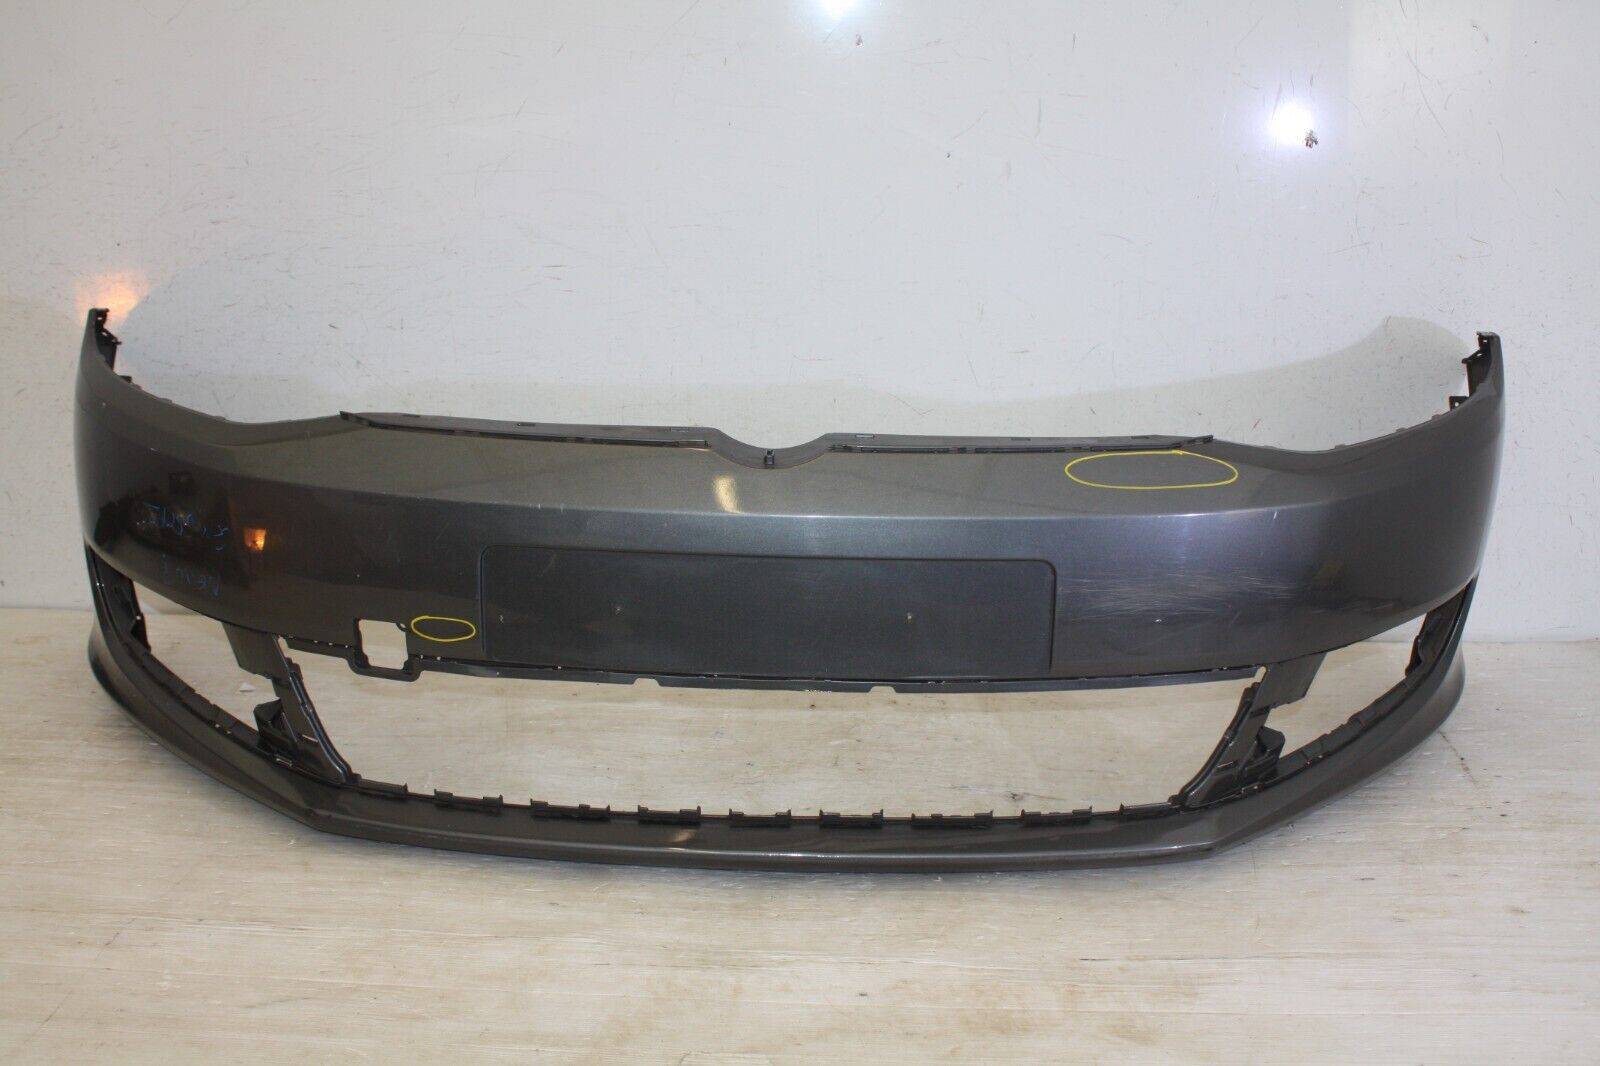 VW Sharan Front Bumper 2010 TO 2015 7N0807221A Genuine 176120701470